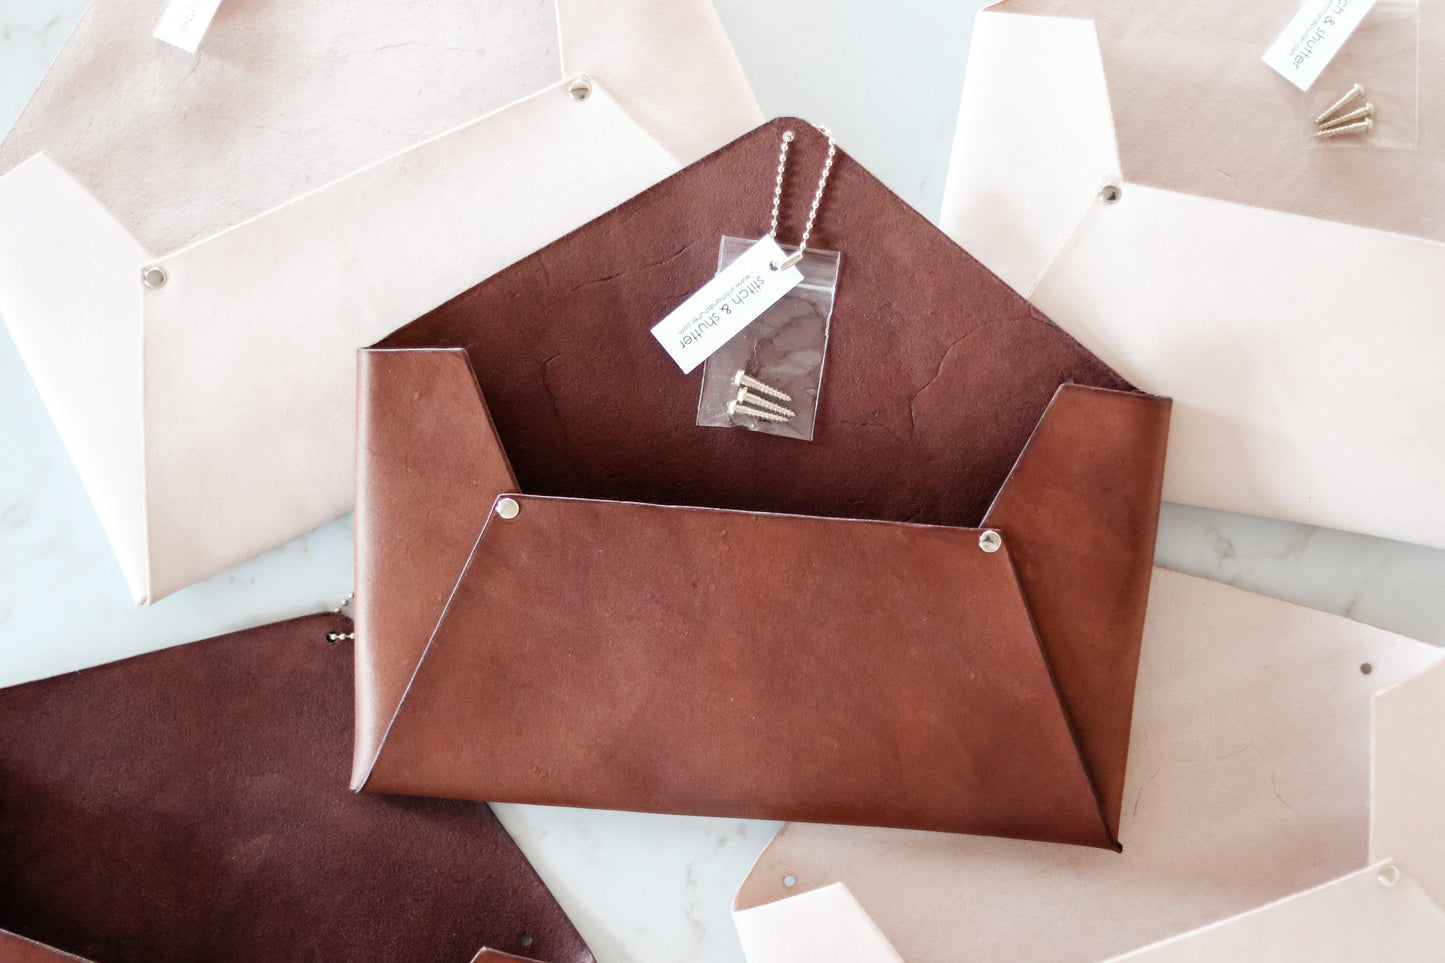 Leather wall mail holder. Brown handmade leather wall pocket